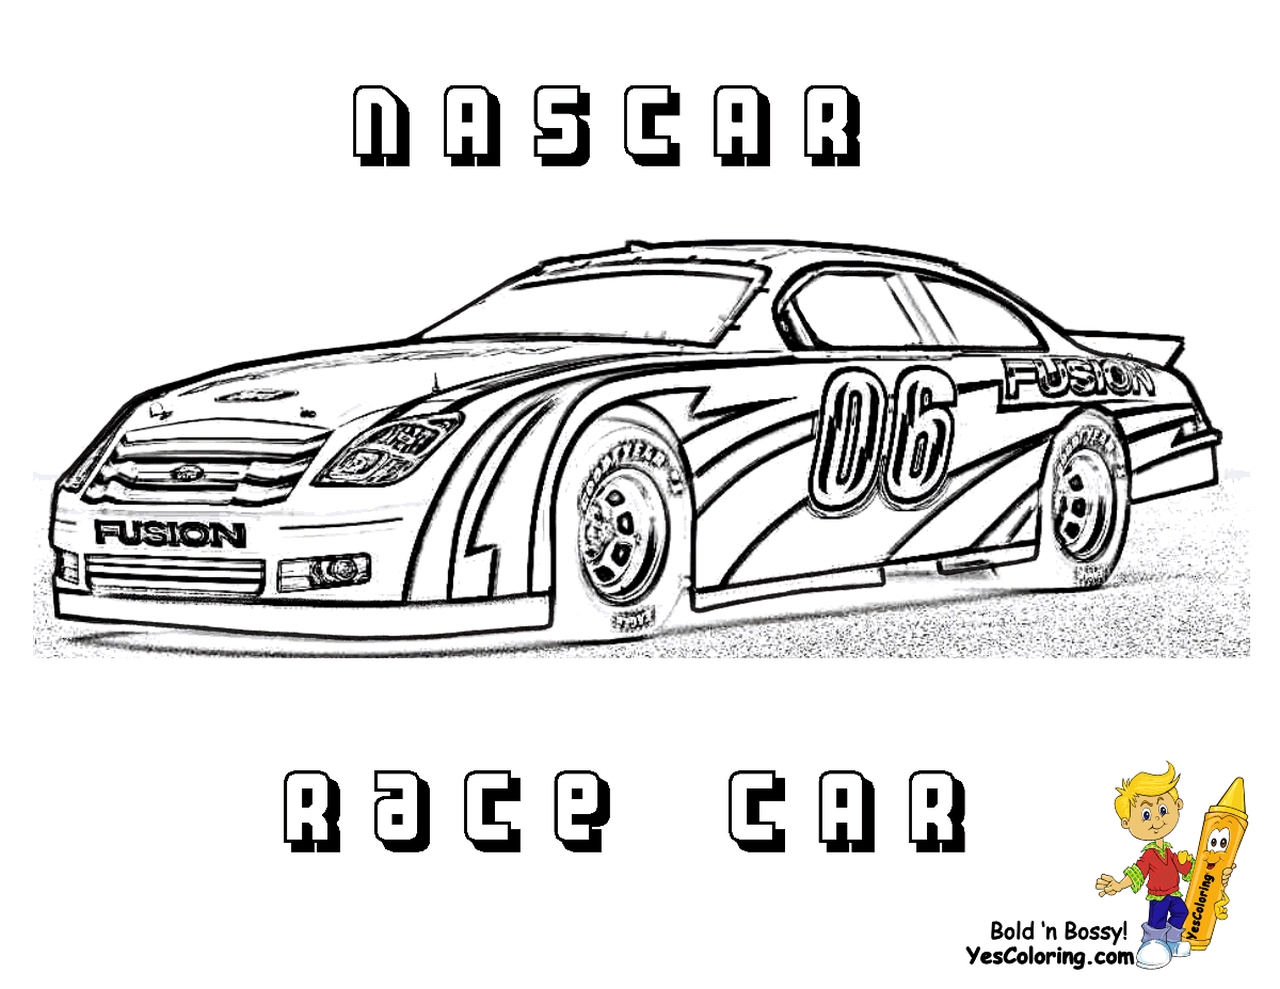 Nascar racing car coloring pages for boys –